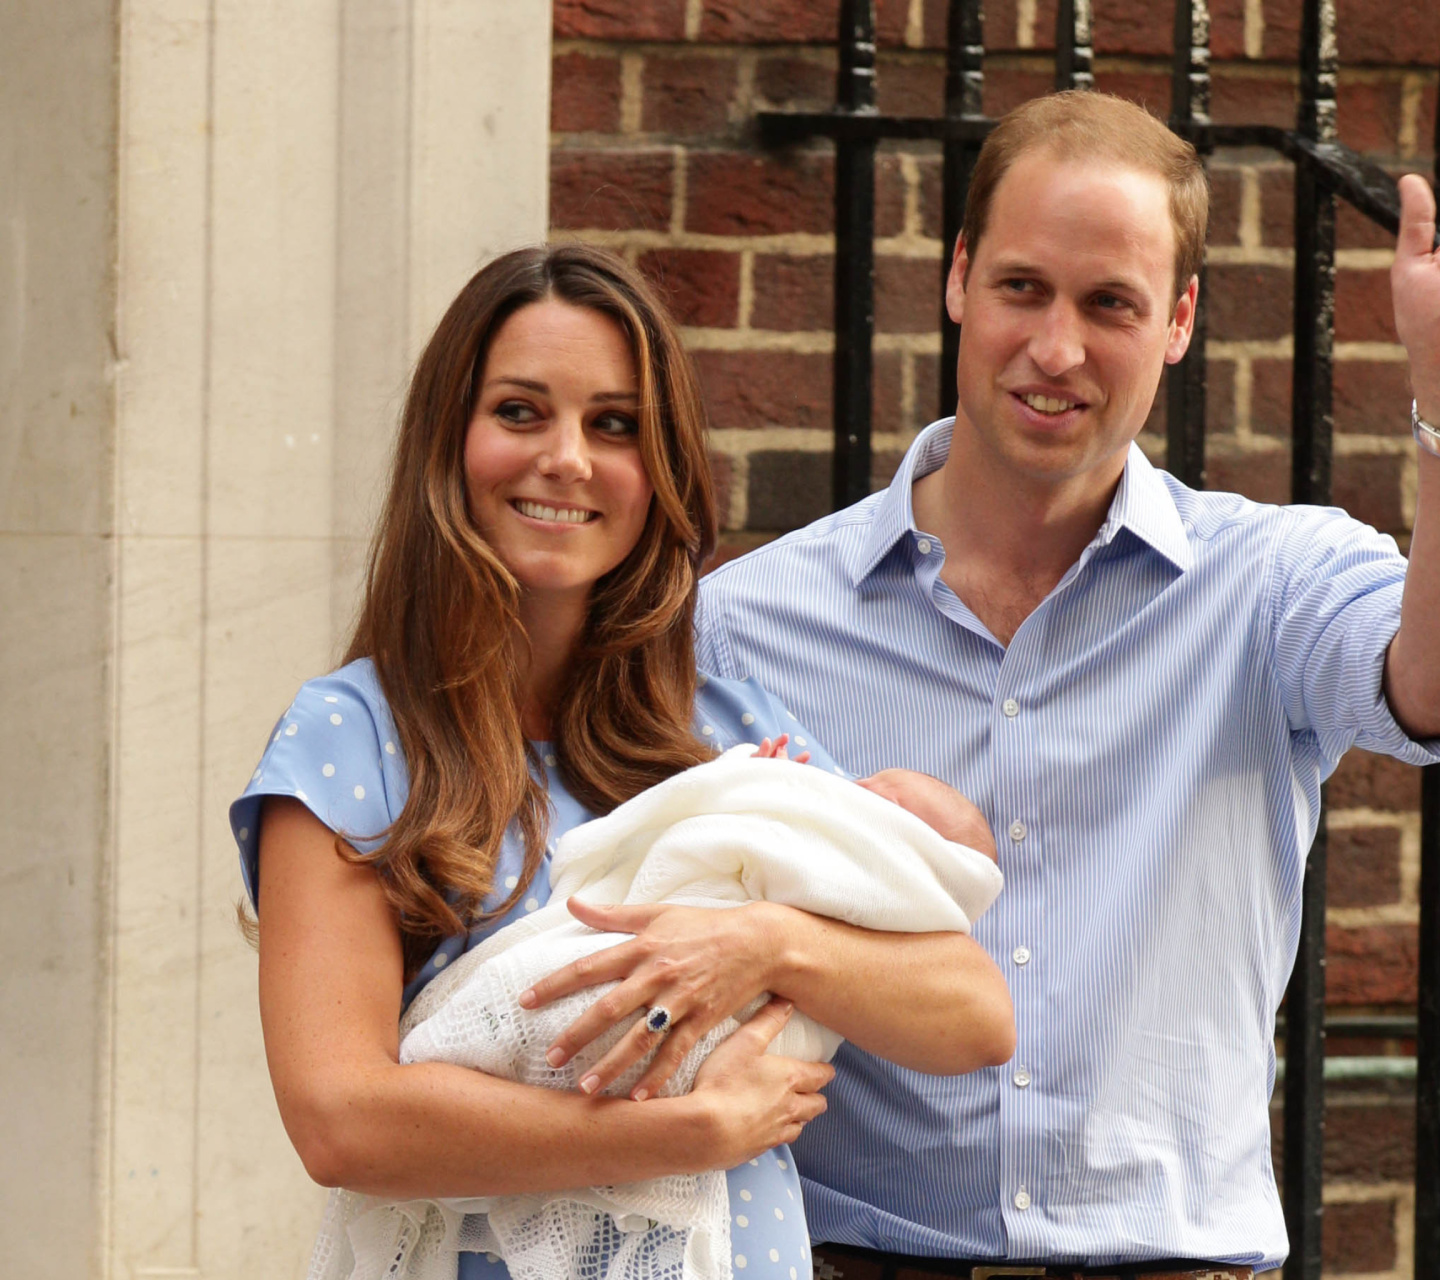 Royal Family Kate Middleton and William Prince wallpaper 1440x1280